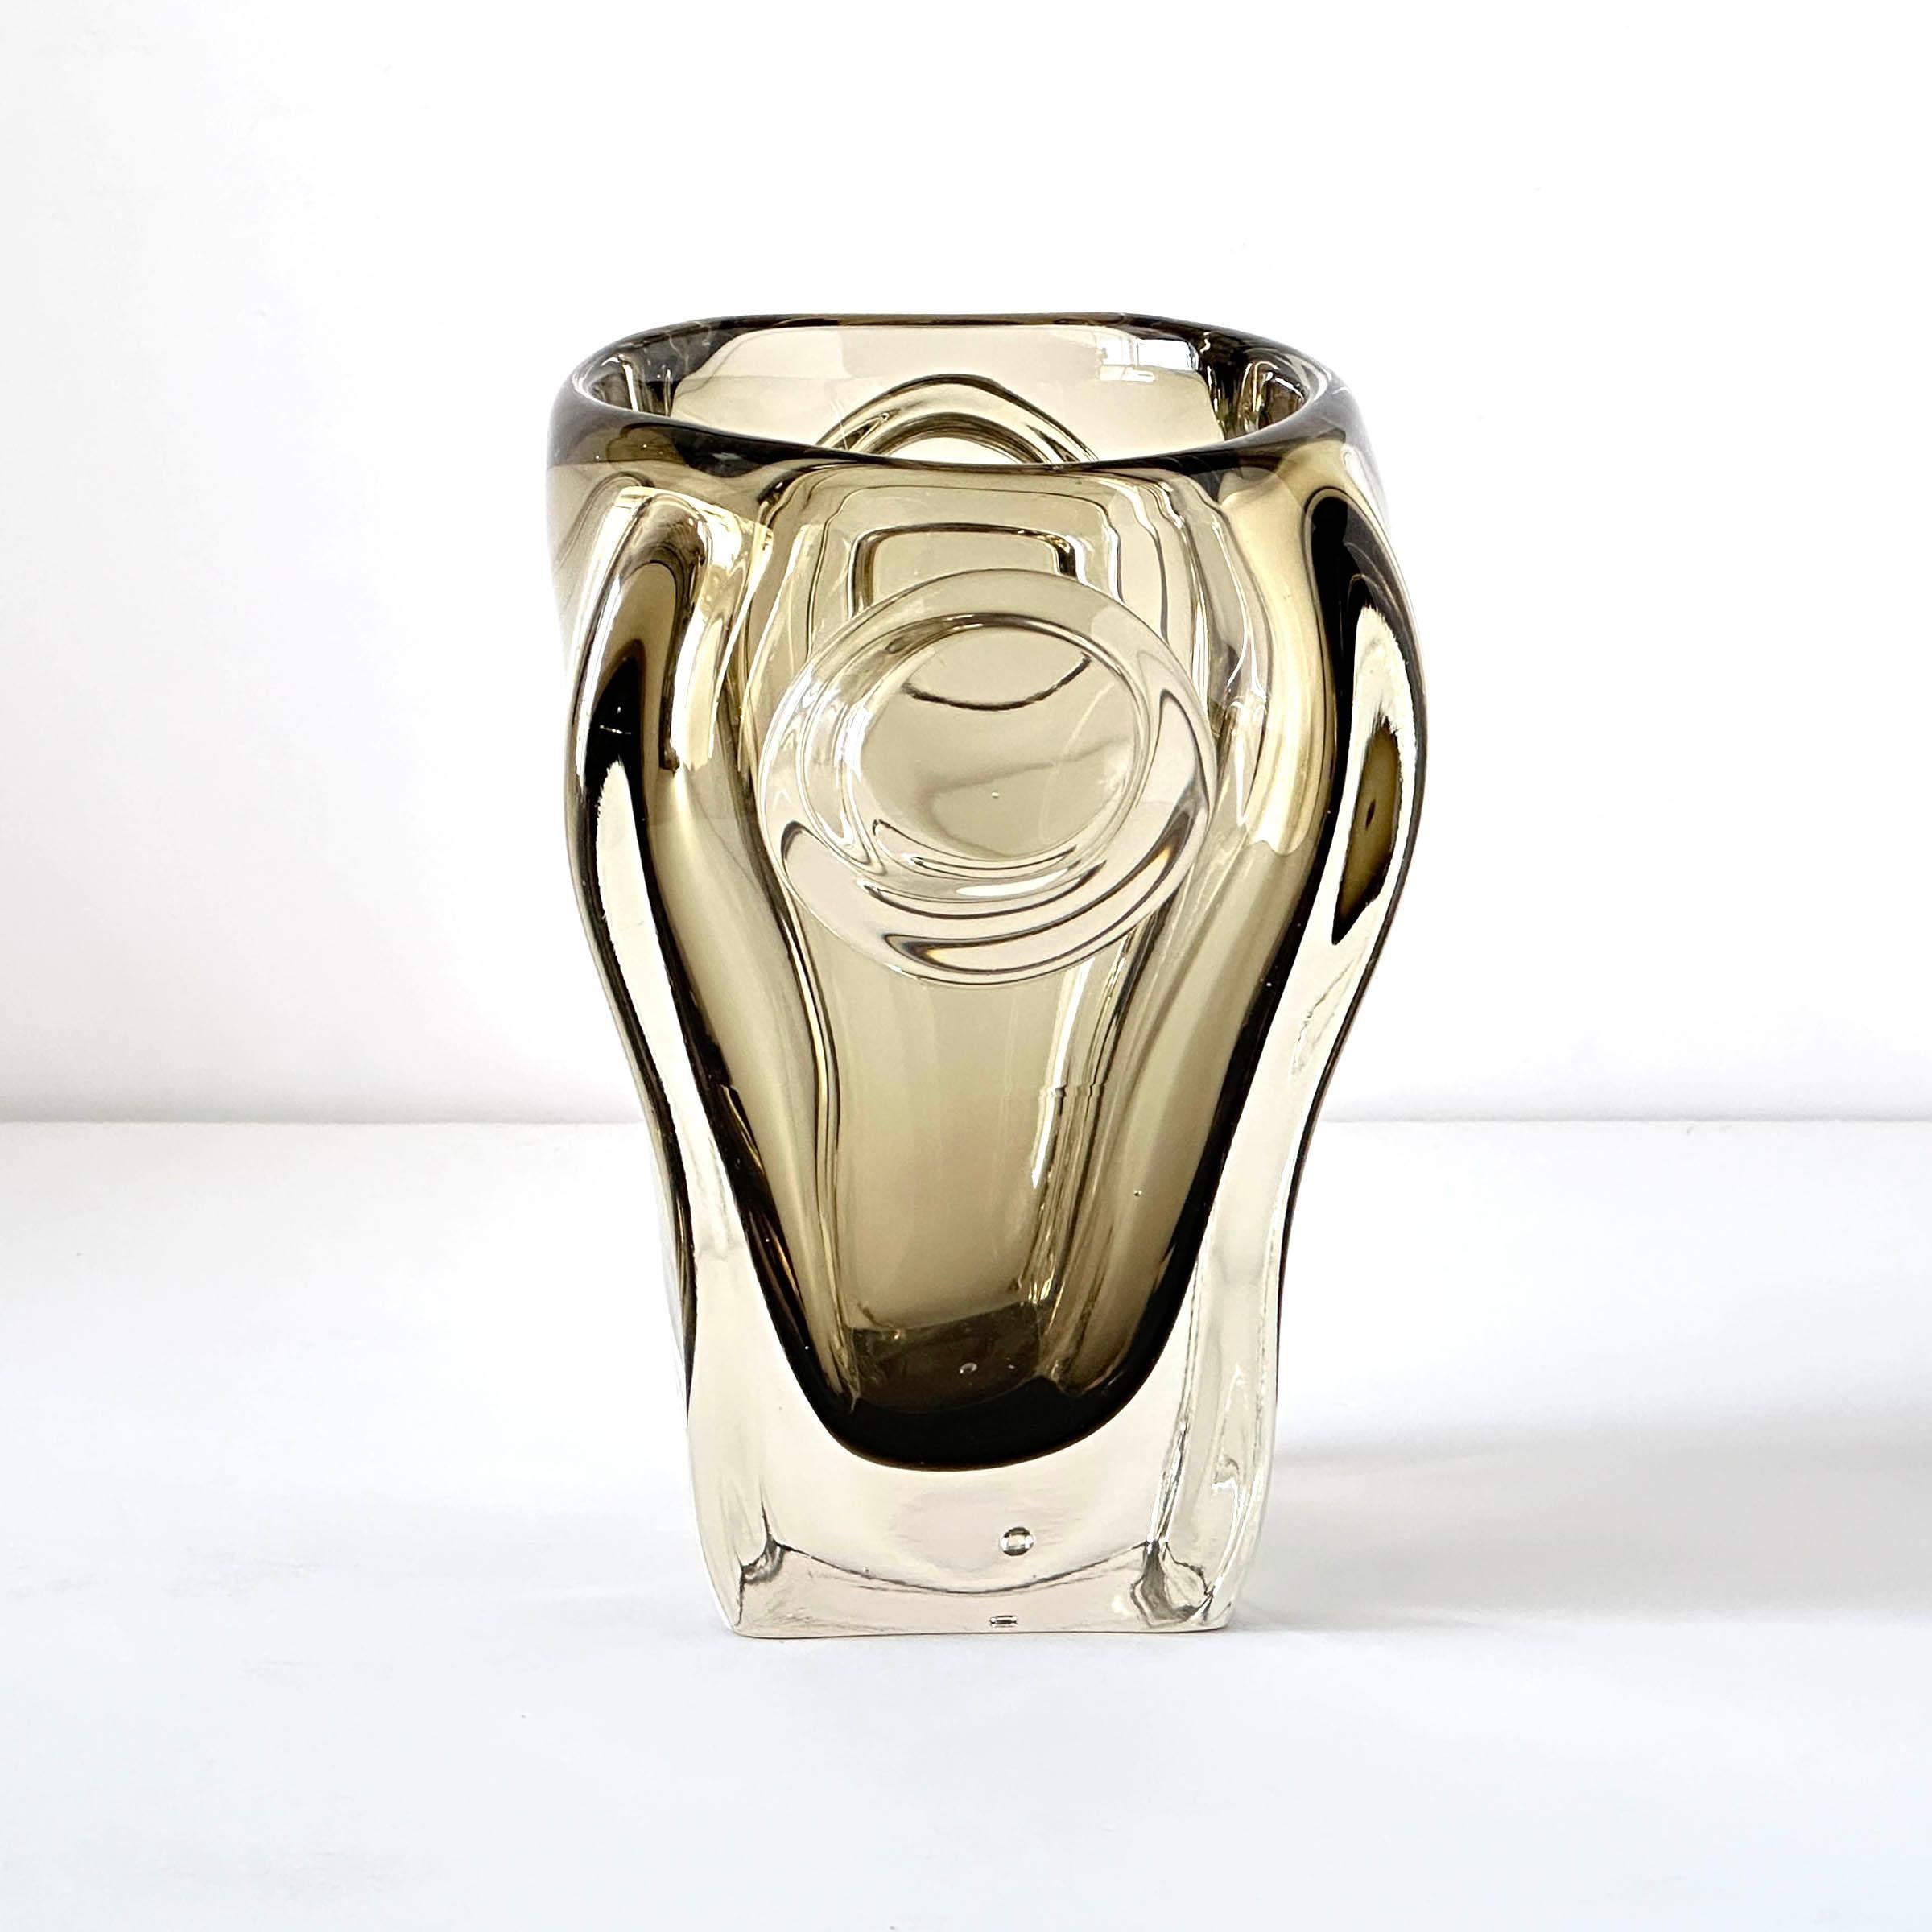 Fantastic heavy art glass ice bucket in the style of Sklo Union Rosice or Sklarna Chřibská Glassworks. Czech art glass at its best, and functional too. Soft asymmetrical organic form with handles on either side. Smoky warm gray encased in clear